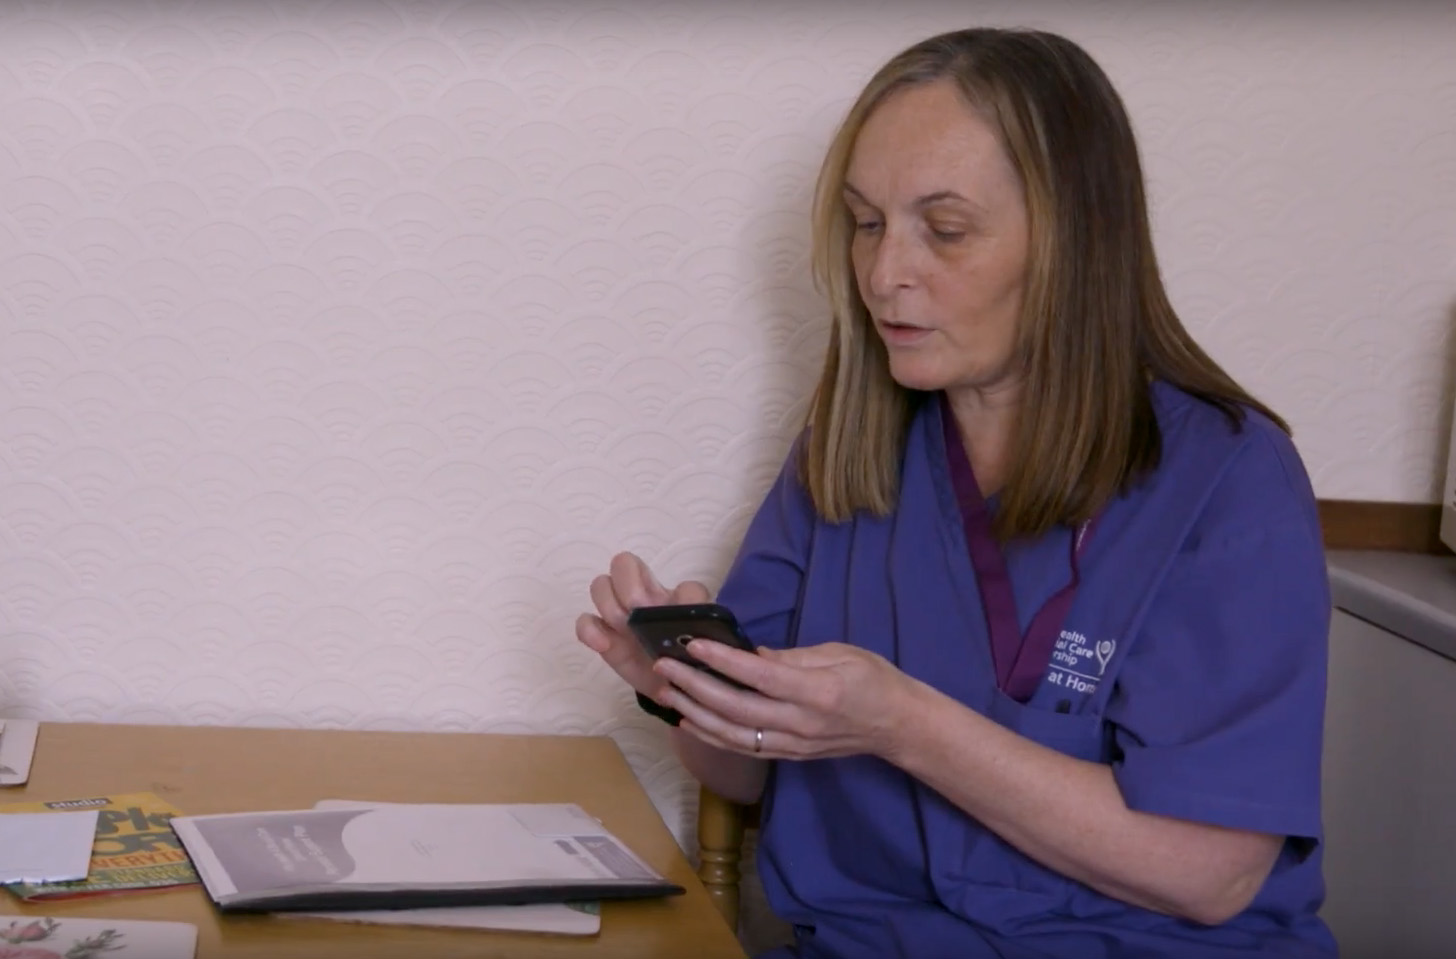 Fife Health and Social Care Partnership increases capacity by 30% through mobile working solutions